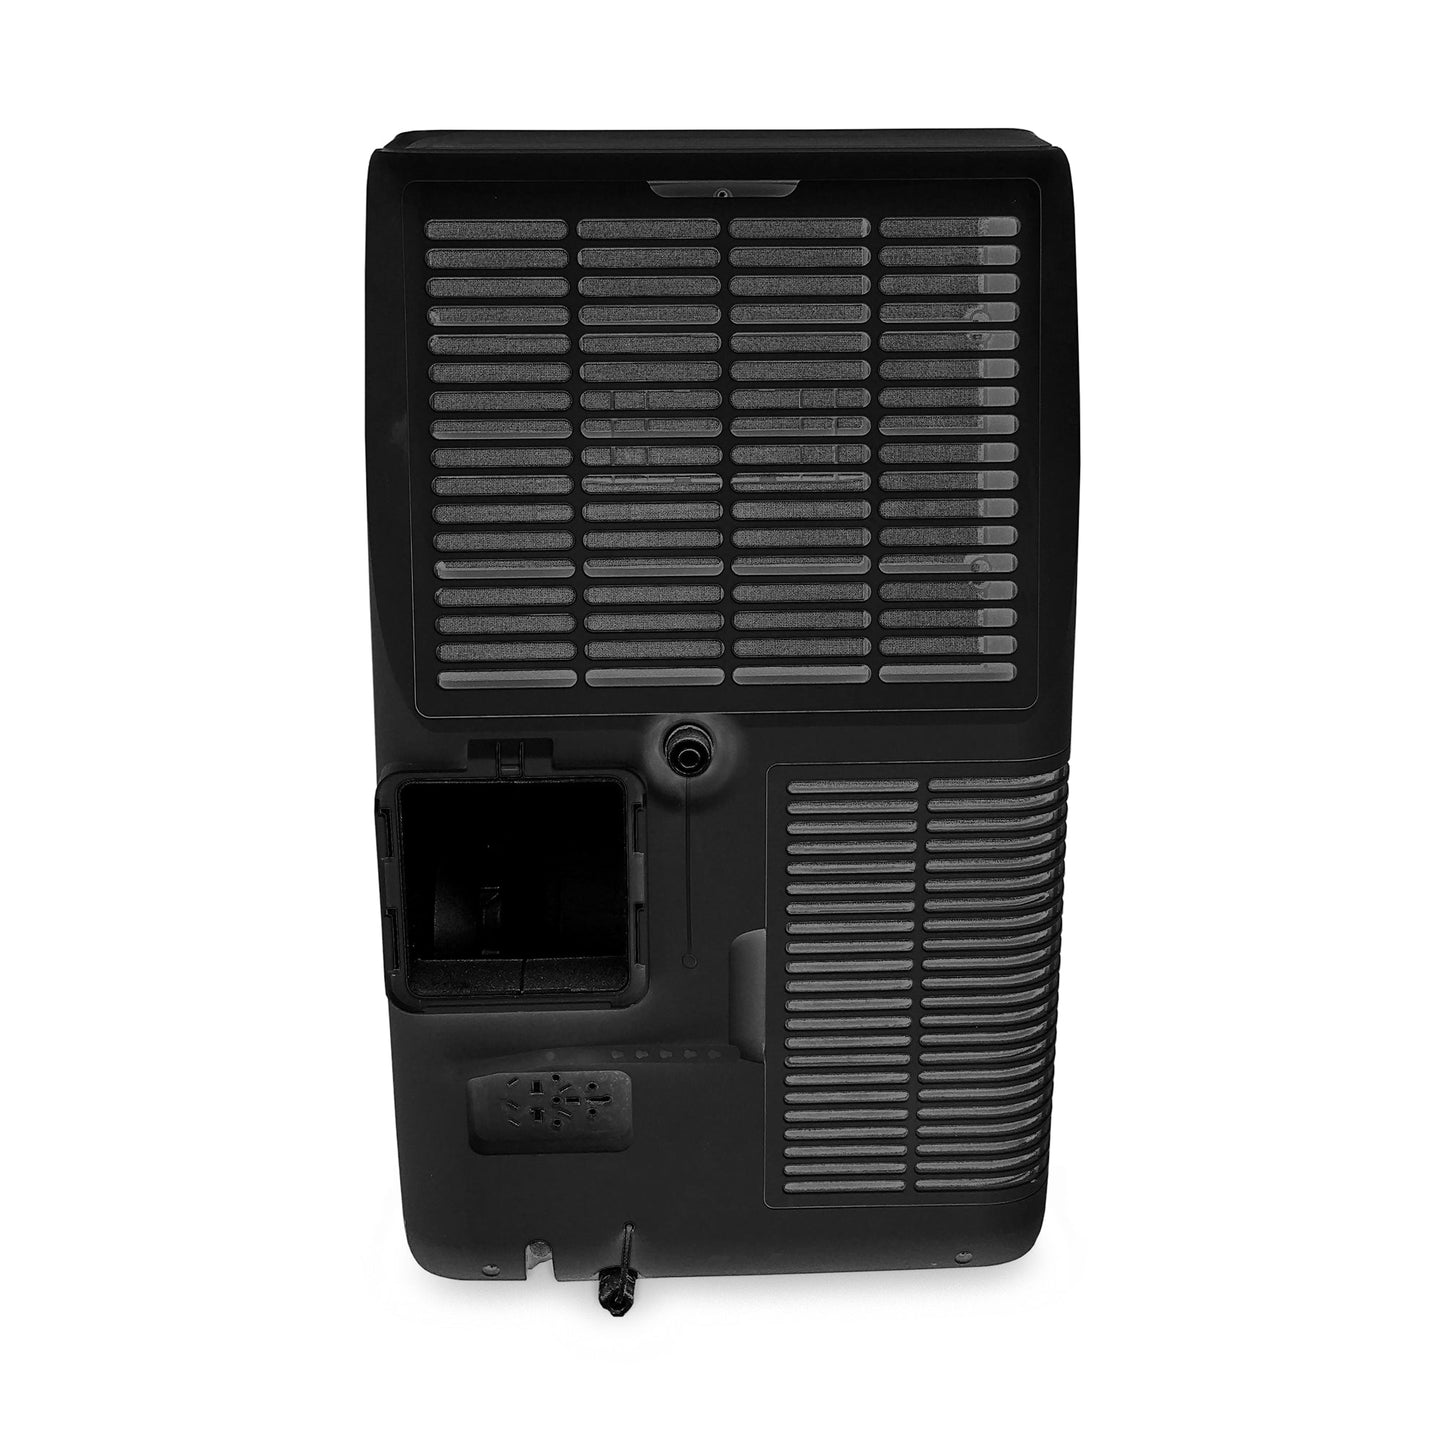 Danby 14,000 BTU (10,000 SACC) 4-in-1 Portable Air Conditioner with ISTA-6 Packaging - Refurbished*